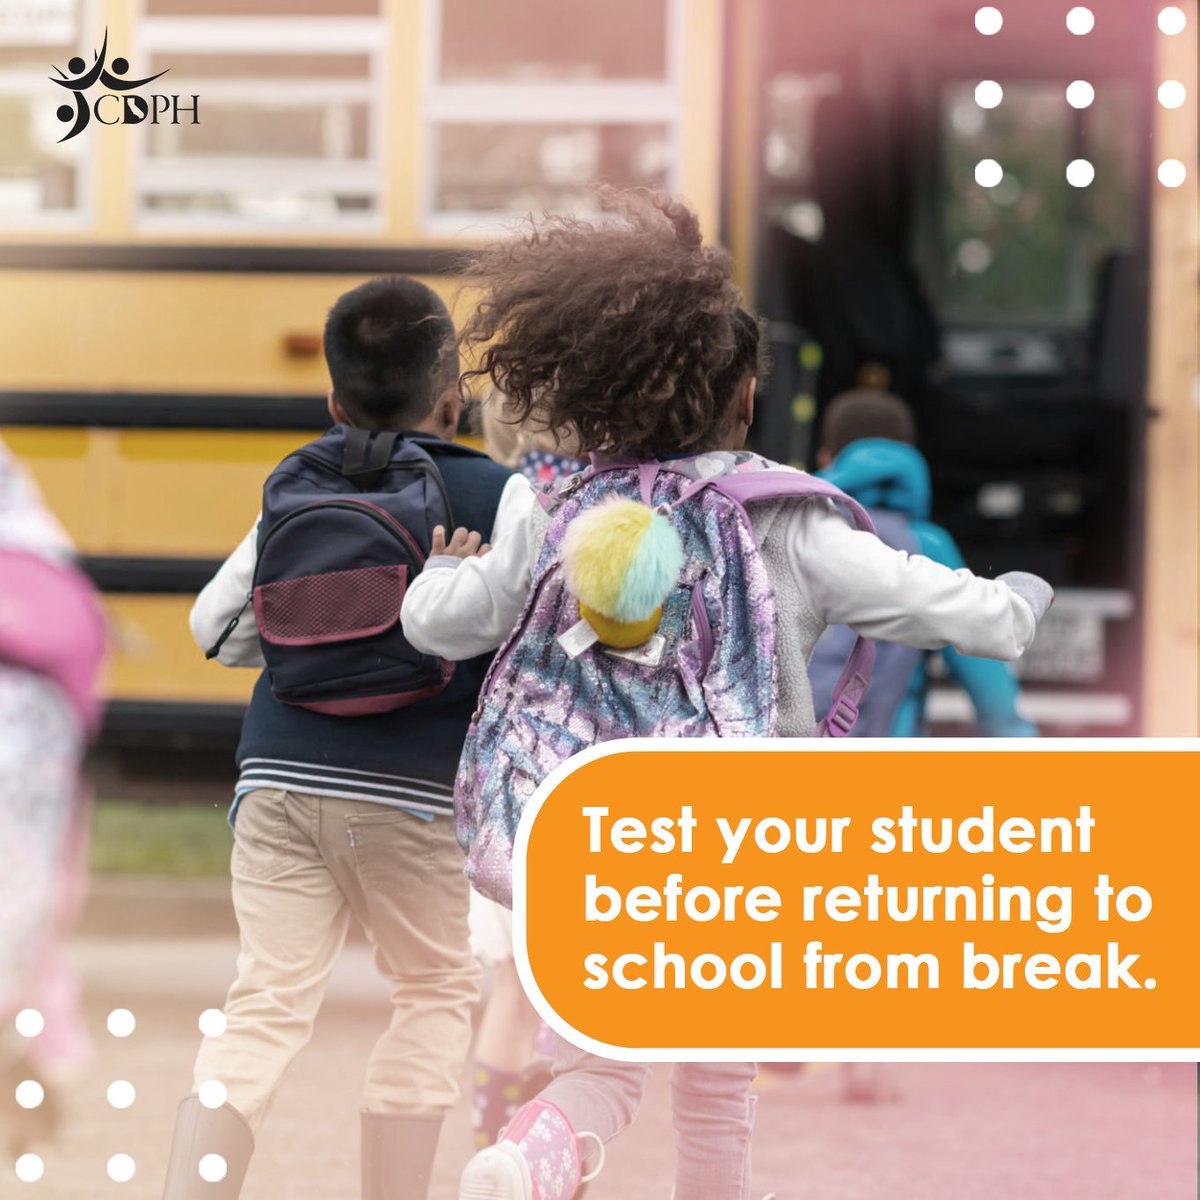 Be prepared to return from winter break! California is providing free /at-home COVID-19 tests to K–12 schools in California. Return to school safely by learning about #OTCCOVID19Testing program. 

Learn about #COVID19 and CA schools: schools.covid19.ca.gov  
@CADeptEd